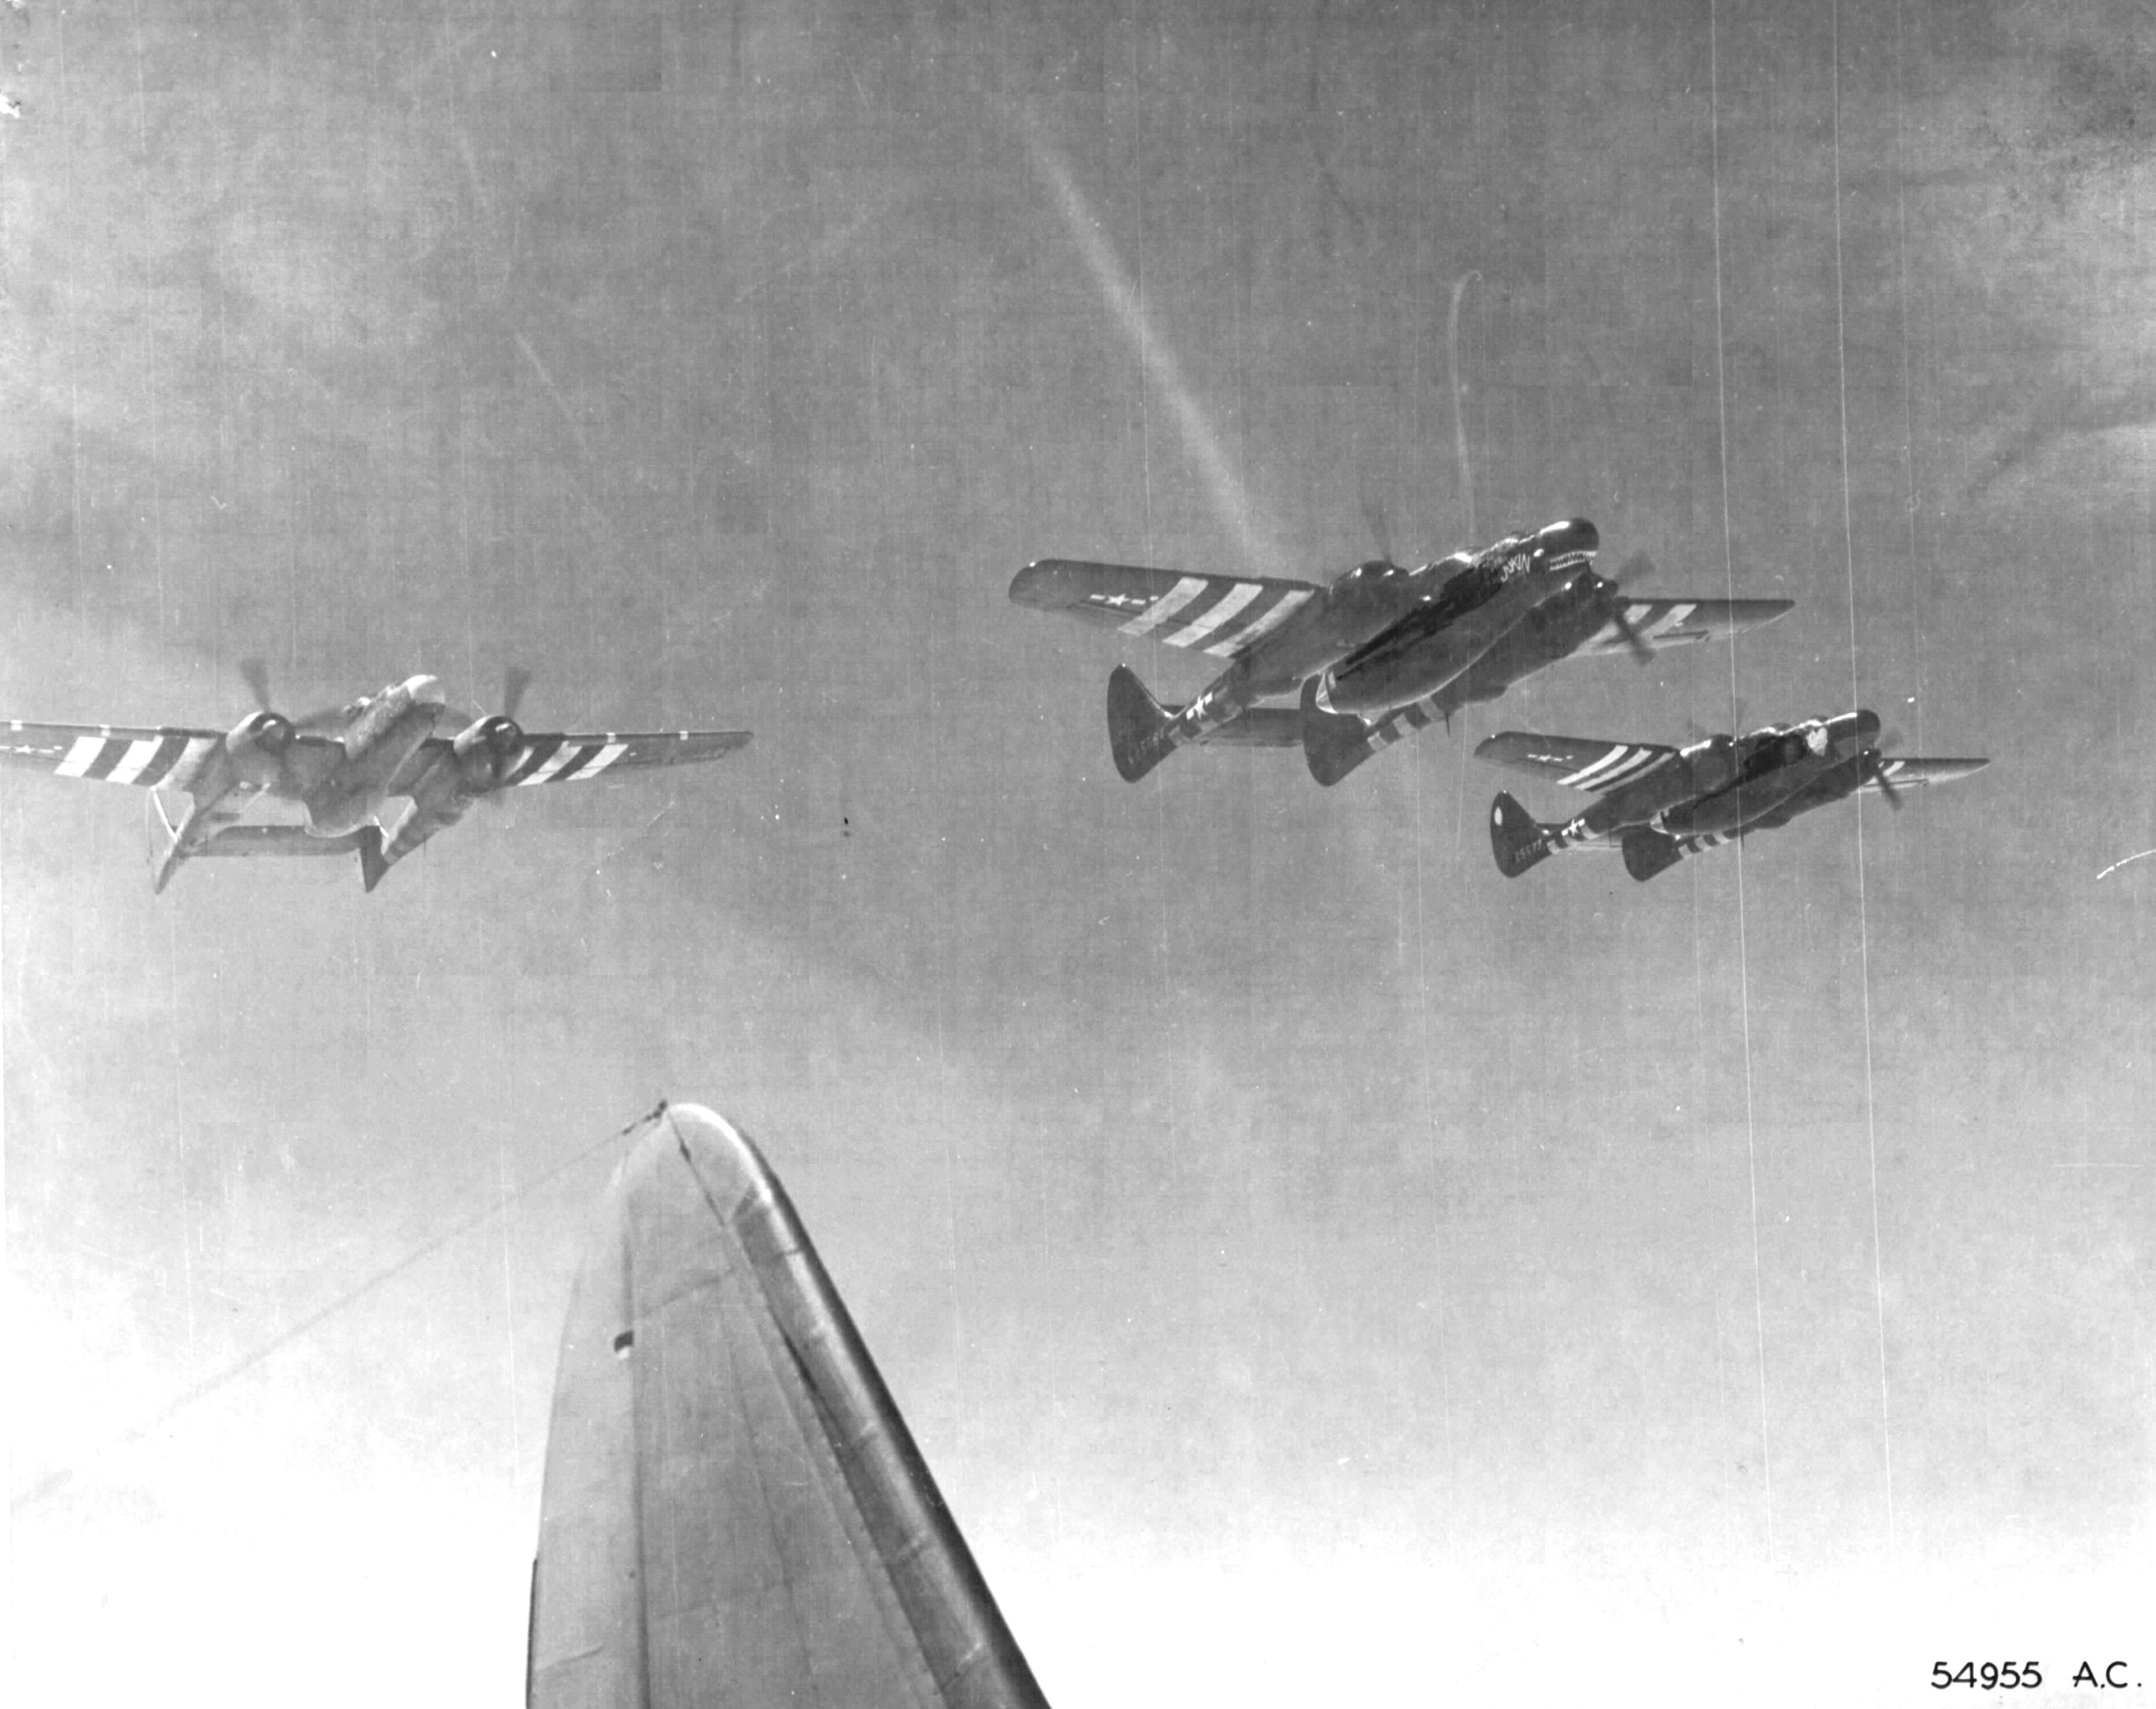 Northrop P-61 Black Widow night fighters of the 422nd Night Fighter Squadron in formation over Western Europe, late Aug 1944